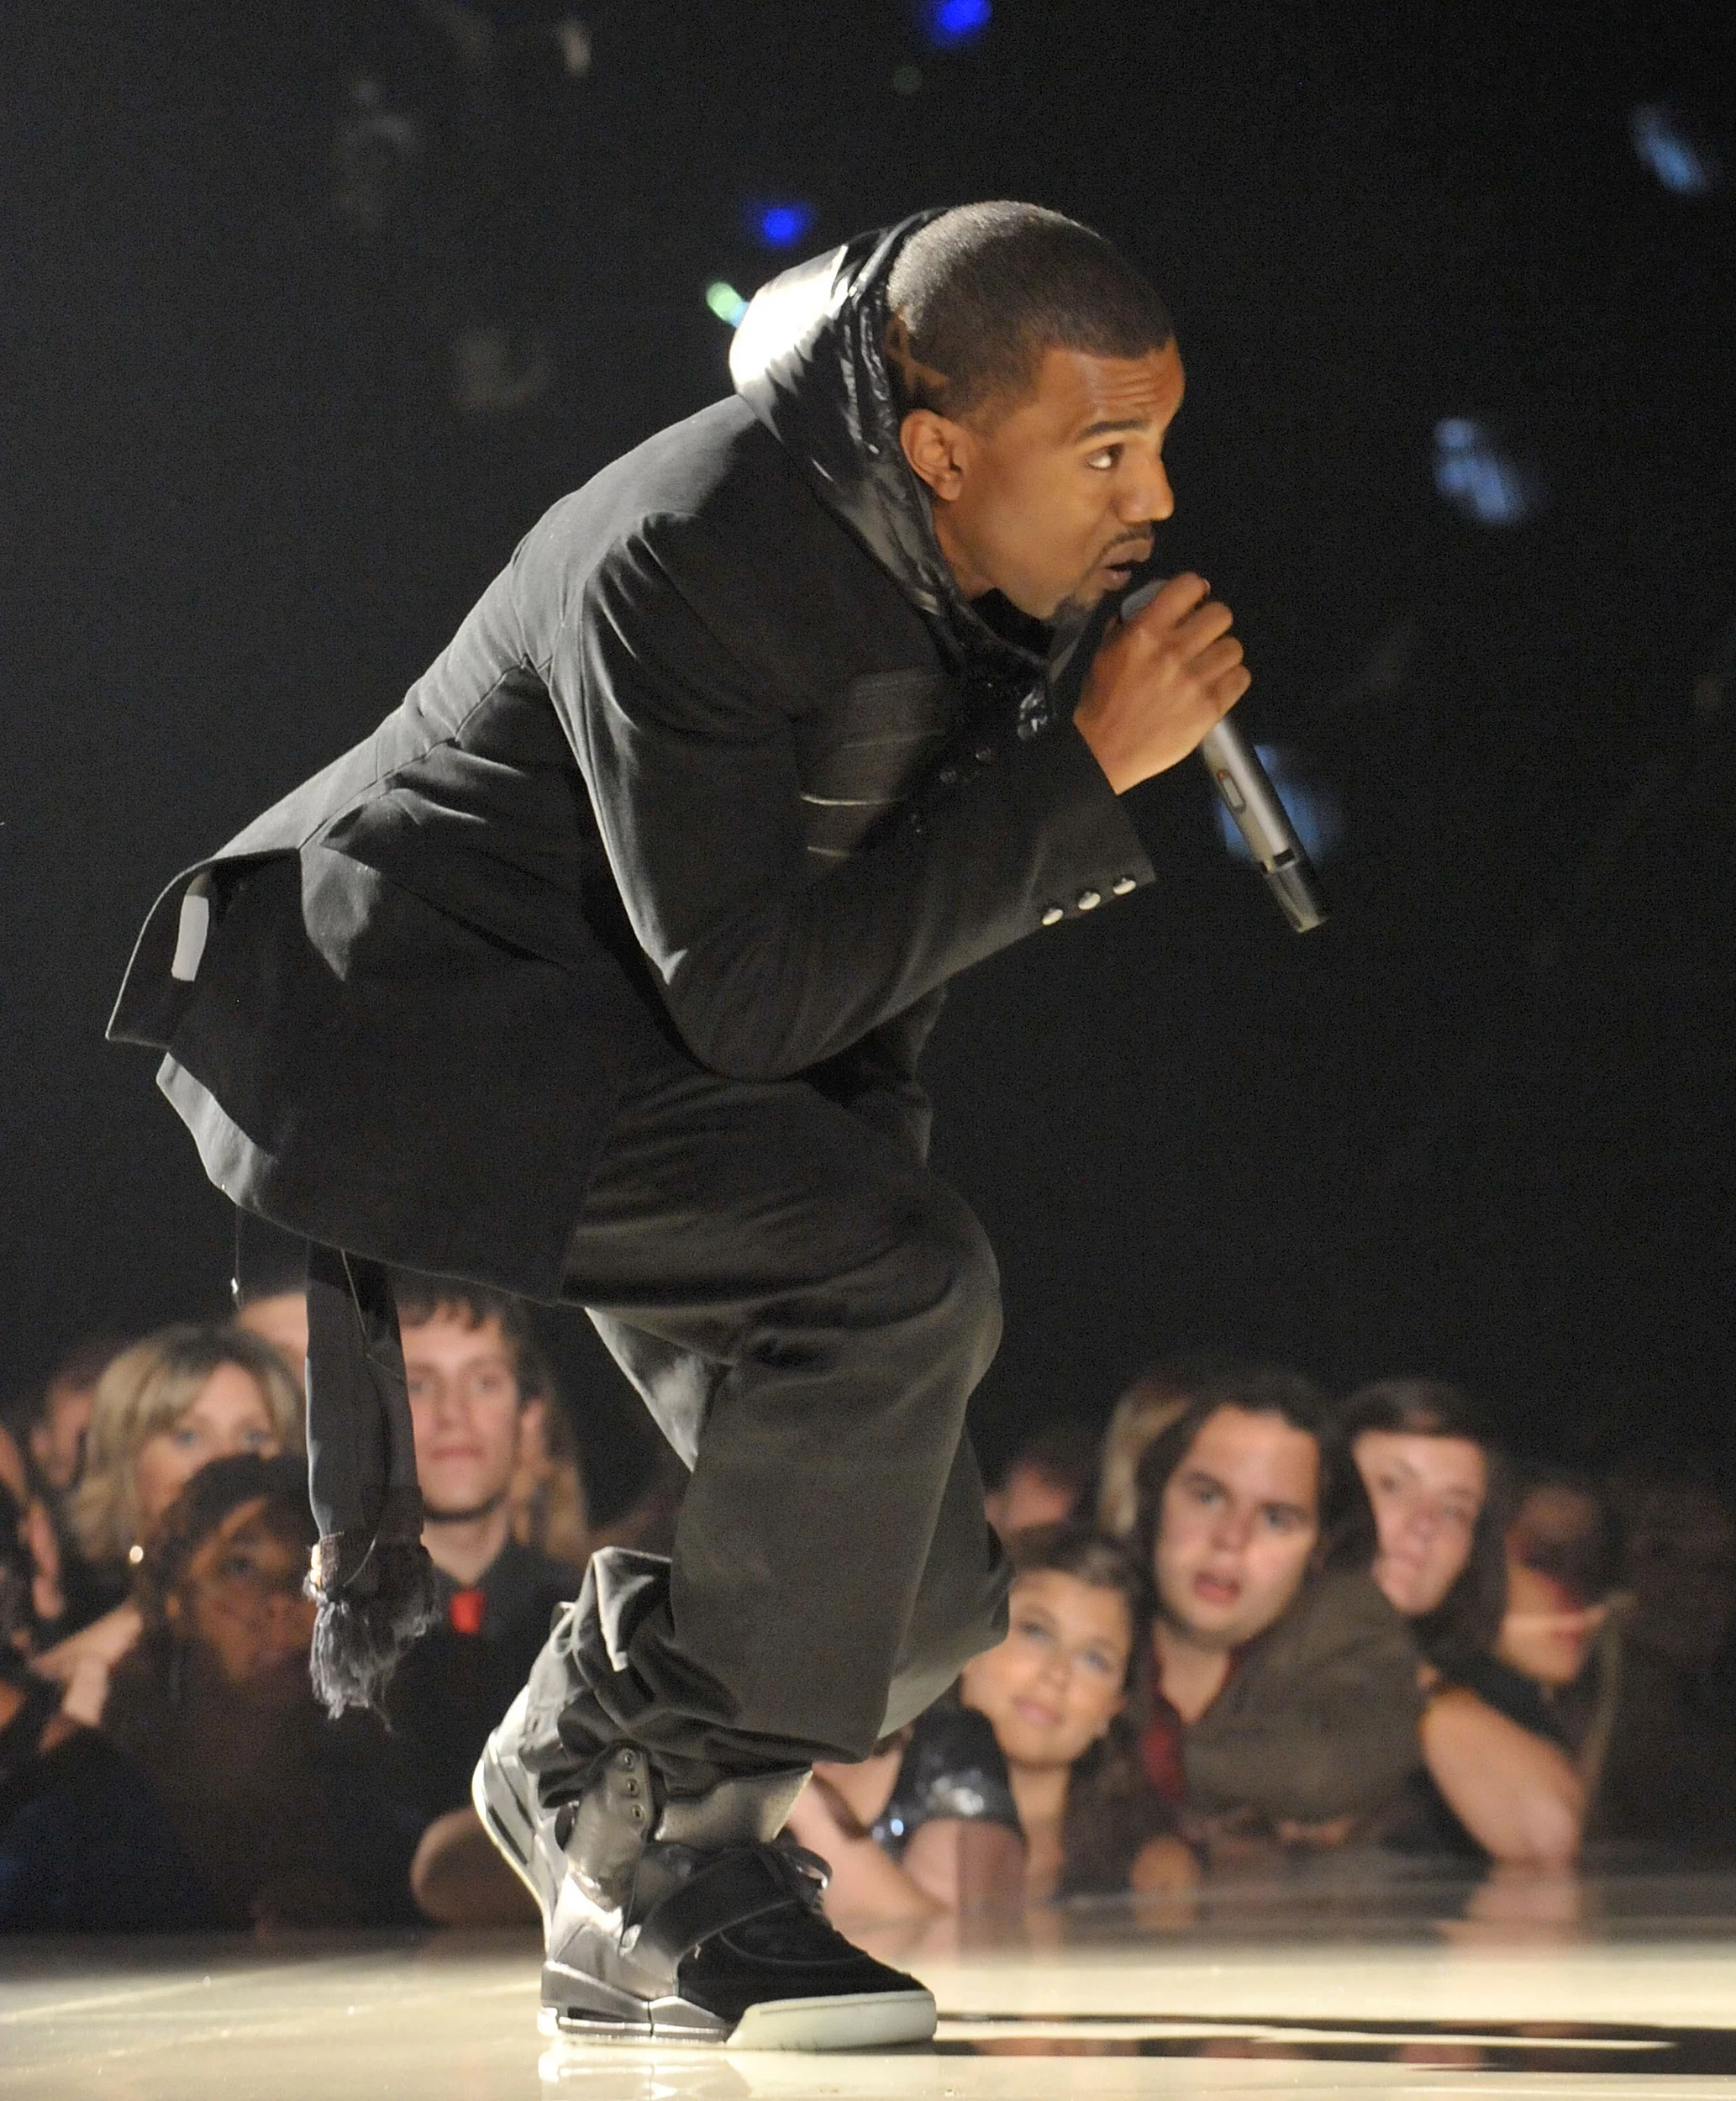 Kanye West Sold His Nike Air Yeezy 1 Prototypes For A Record-Breaking $1.8  Million